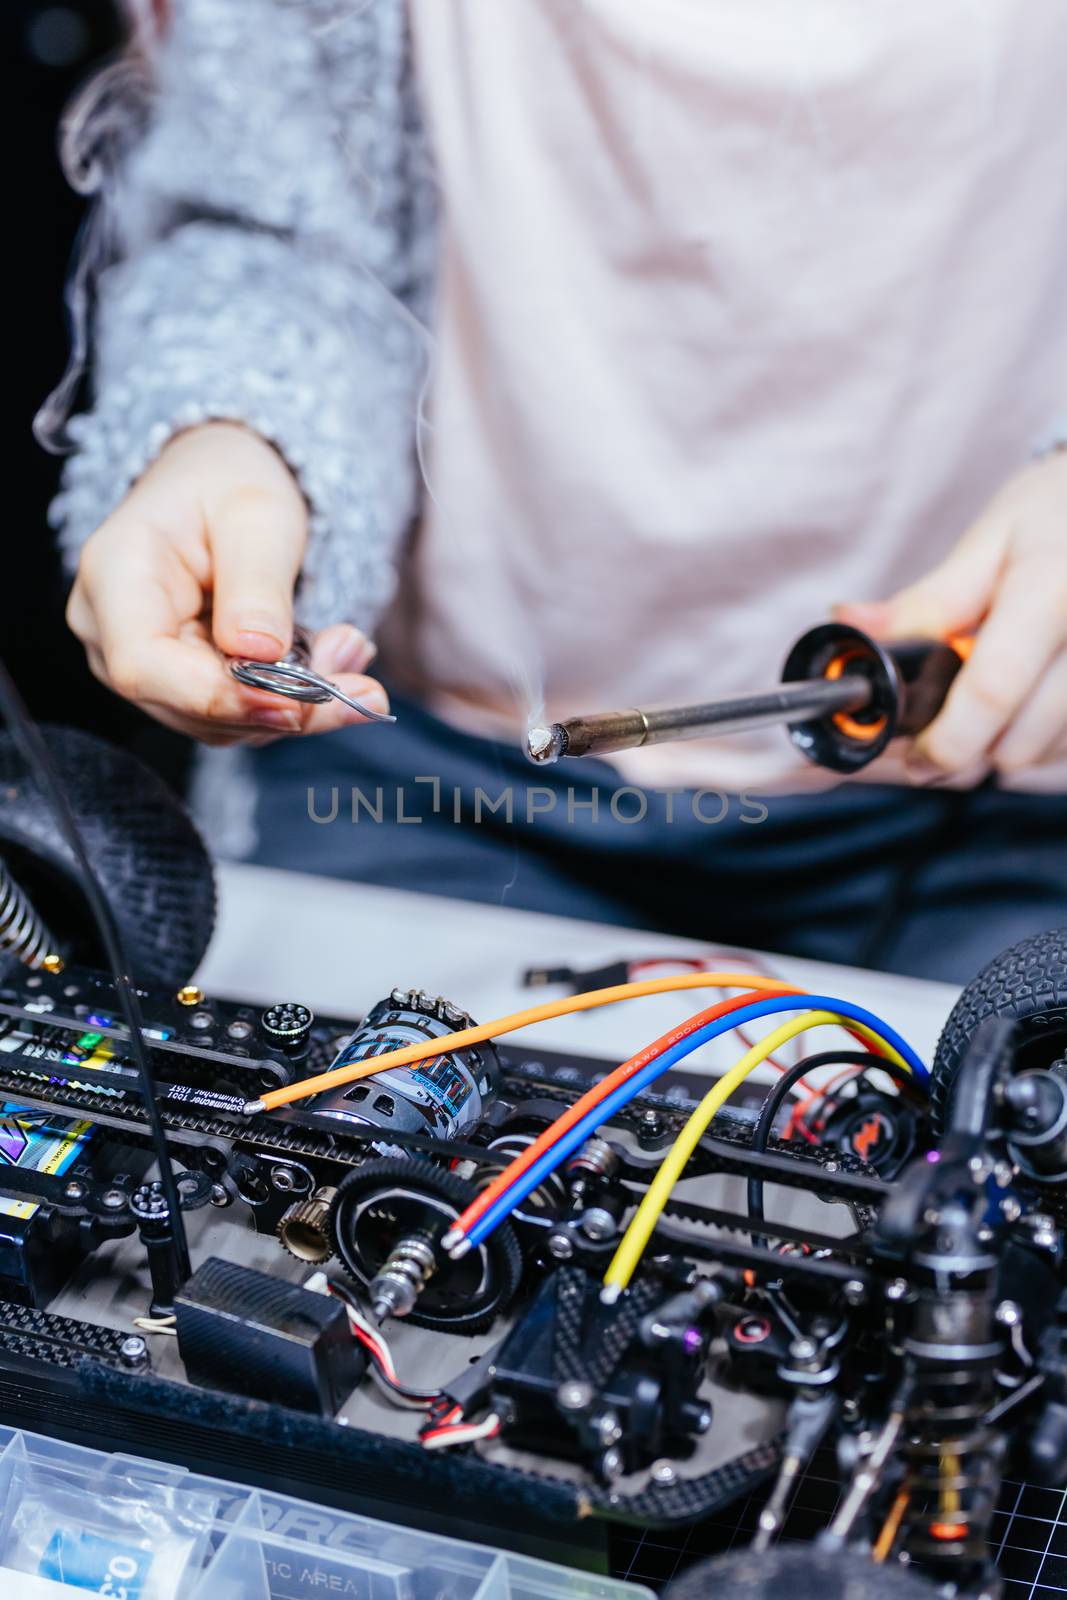 A young girl learns how to solder and is attaching an ESC to a motor in an RC car at a home workshop